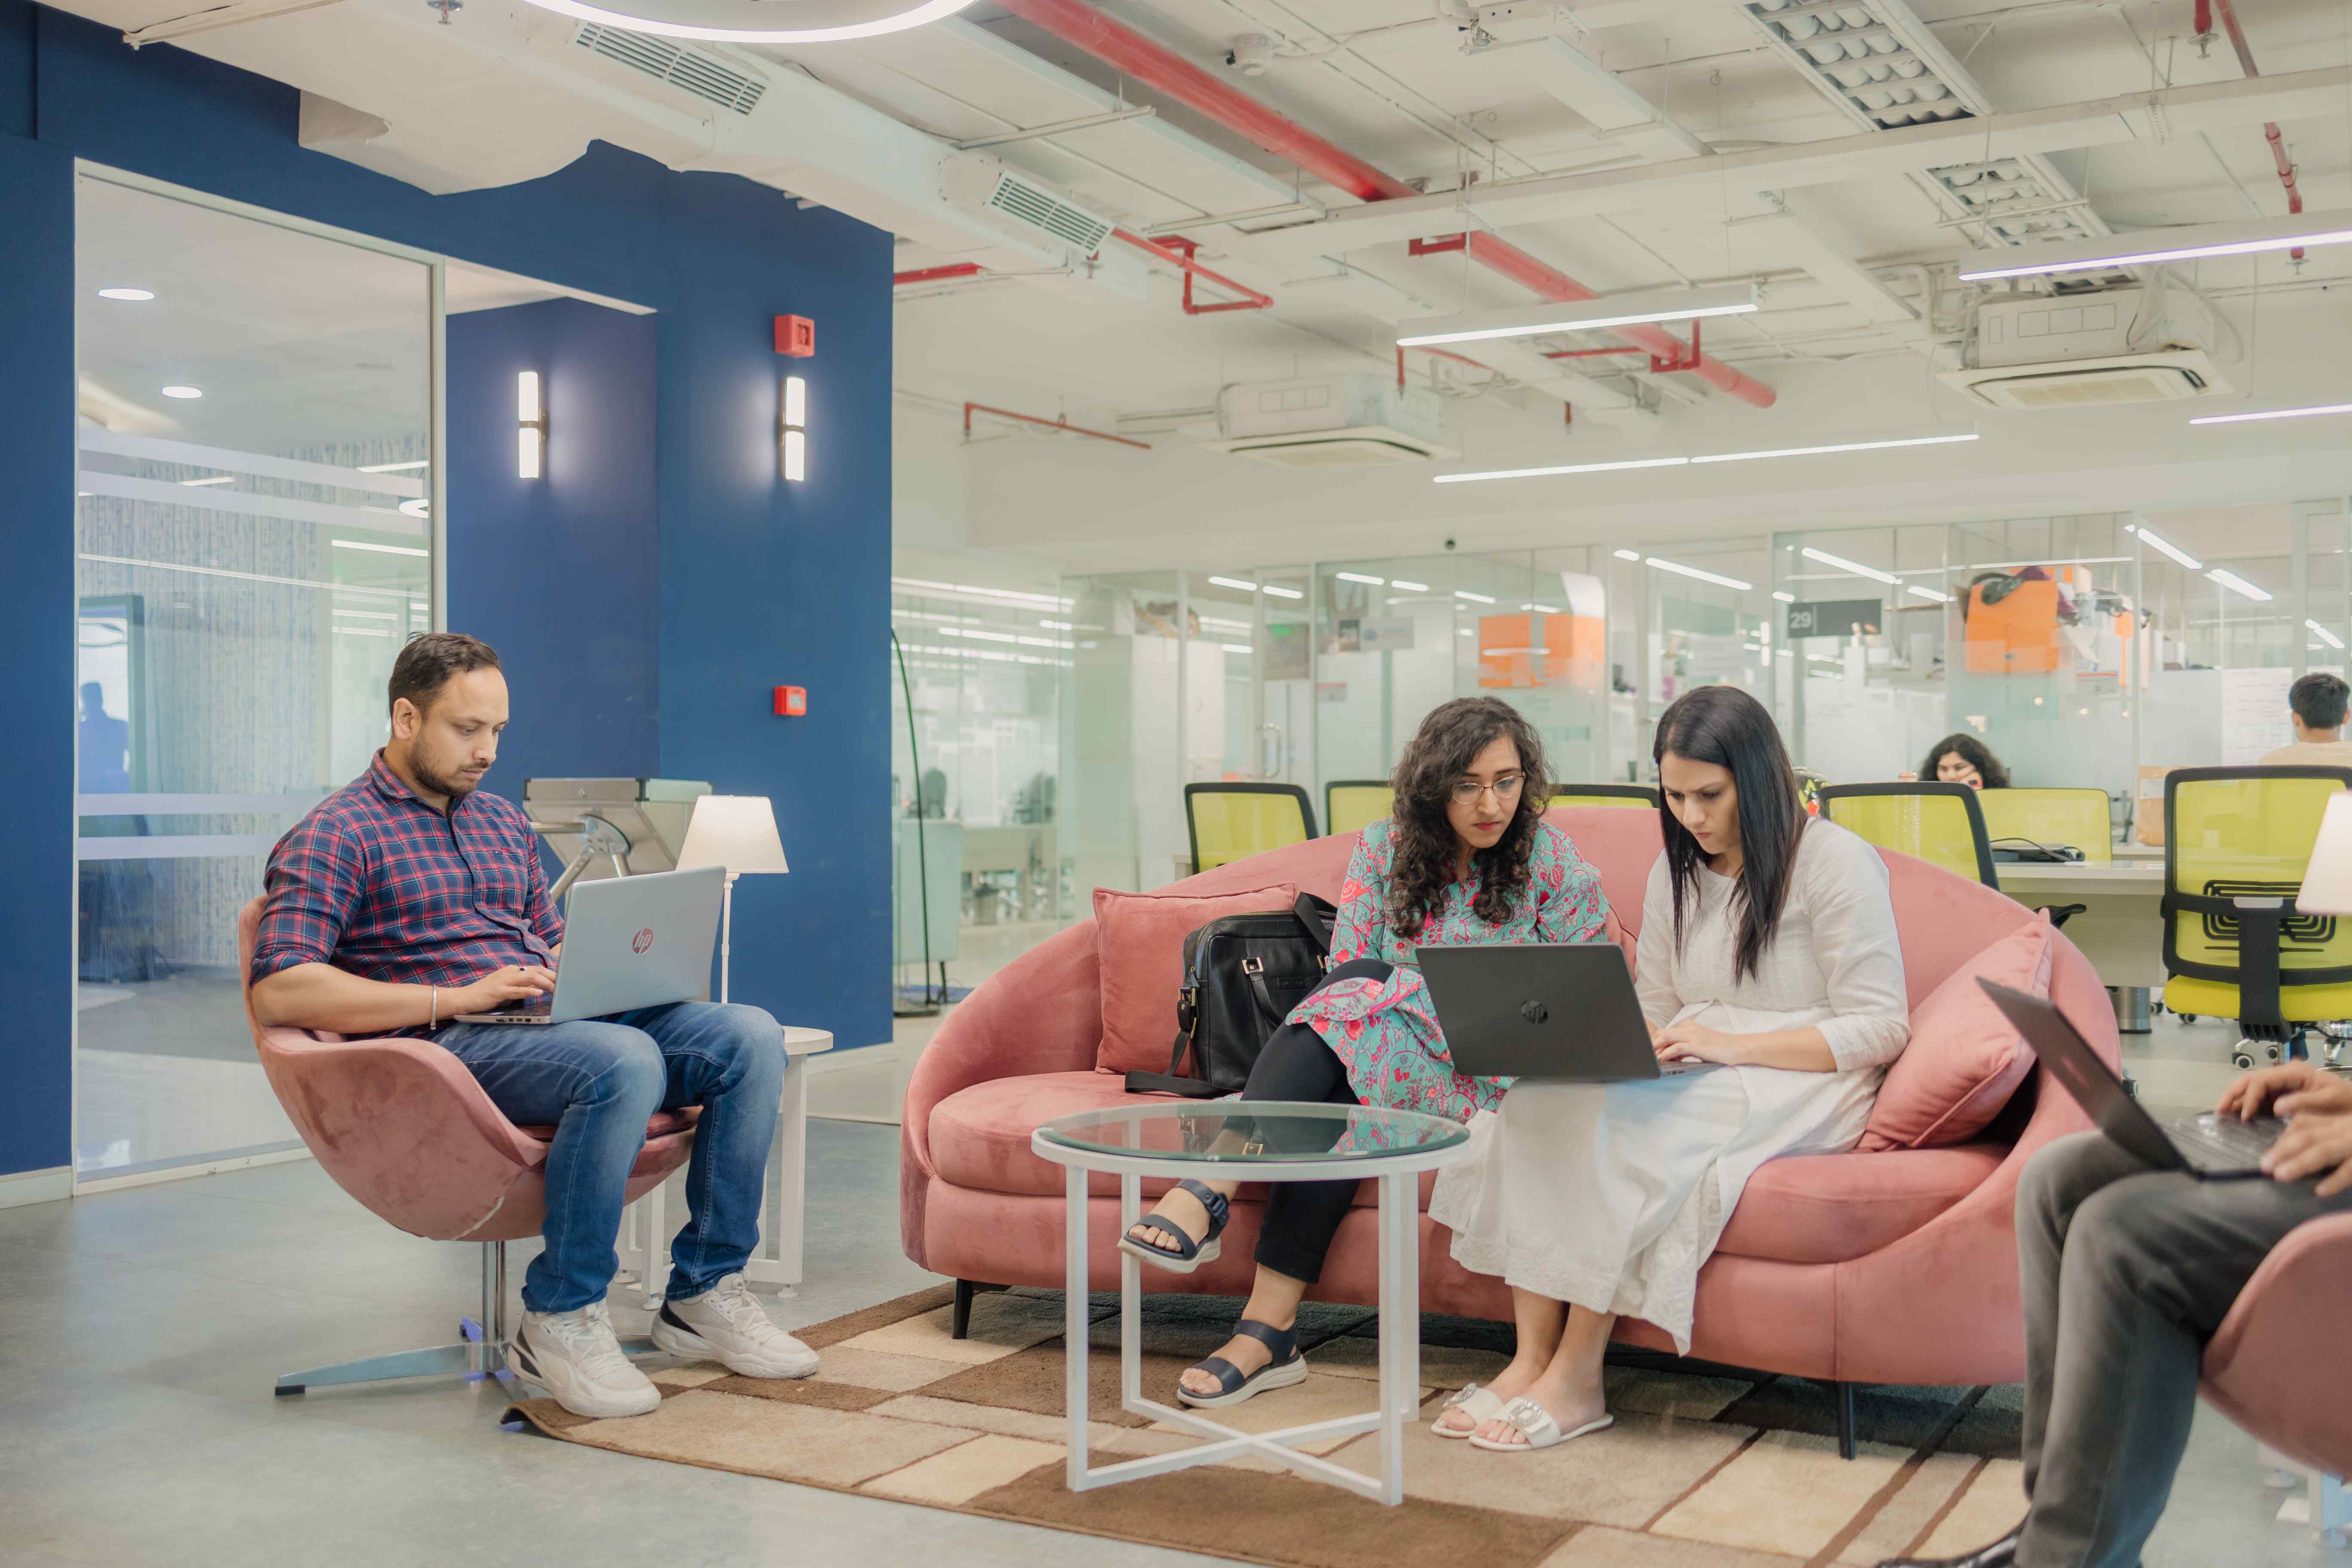 Top Coworking Space in Gurgaon at affordable rates by AltF Coworking G,Gurgaon, Haryana, India,Real Estate,Free Classifieds,Post Free Ads,77traders.com